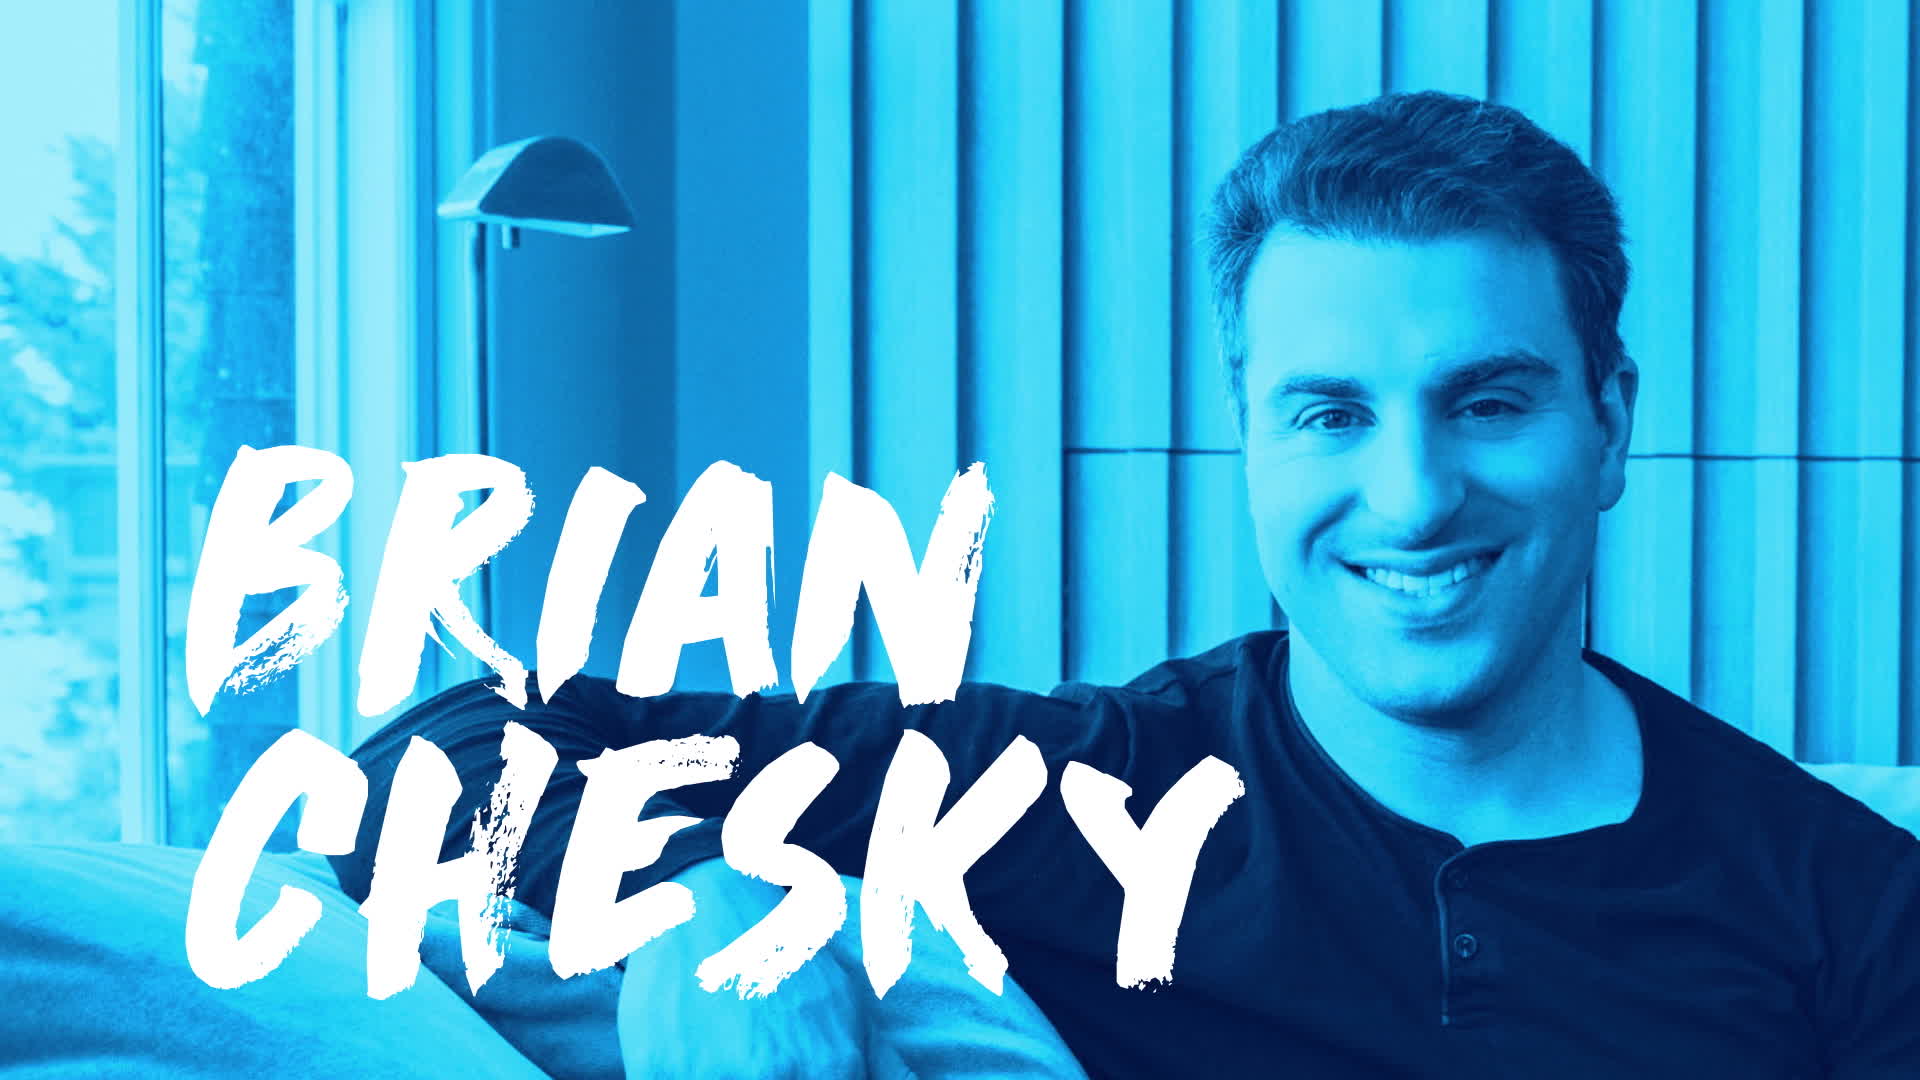 Watch The David Rubenstein Show: Airbnb CEO Brian Chesky - Bloomberg